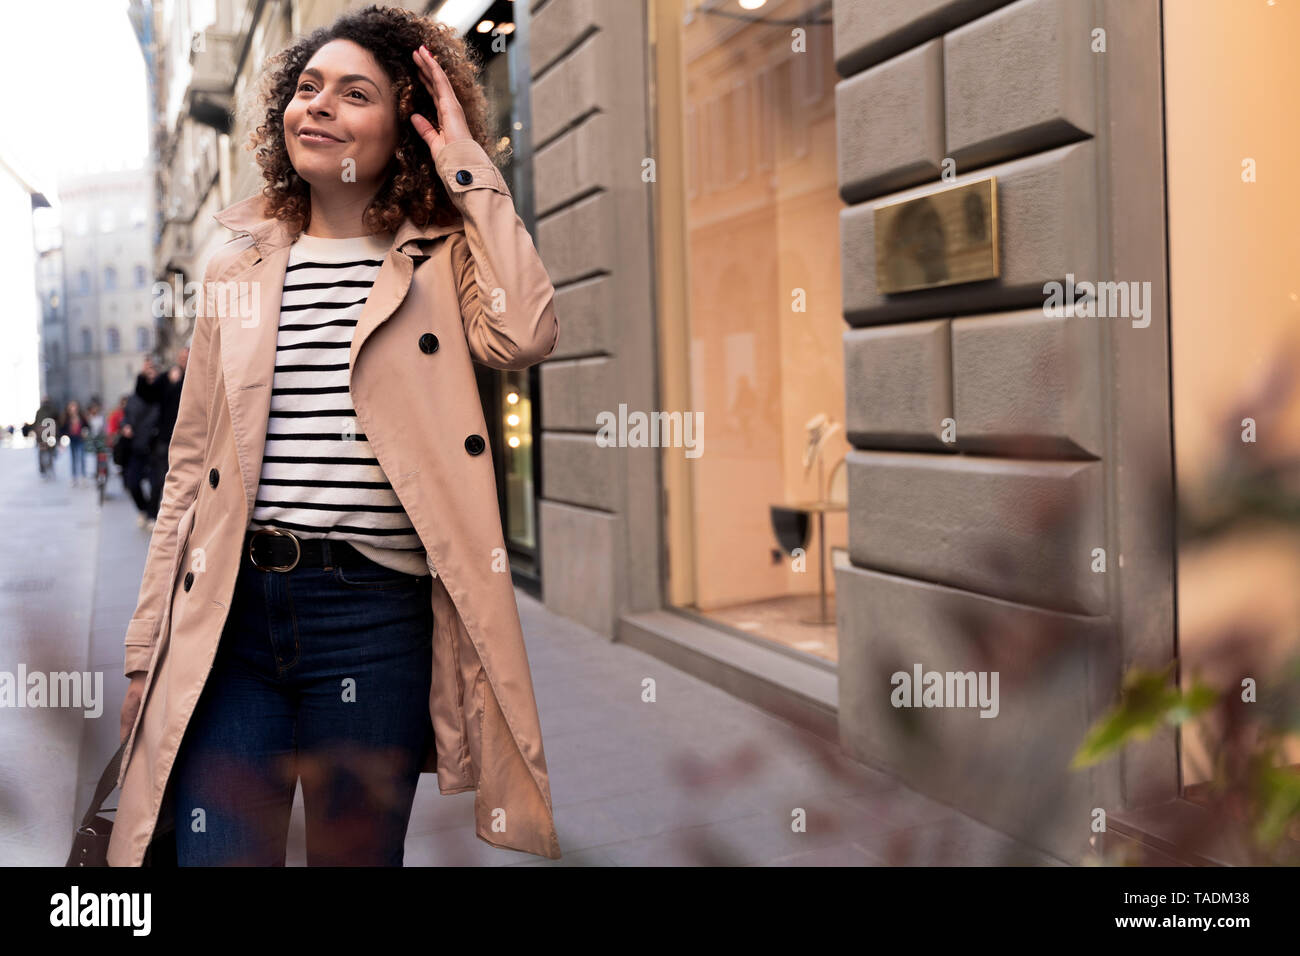 Smiling woman walking in the city Banque D'Images